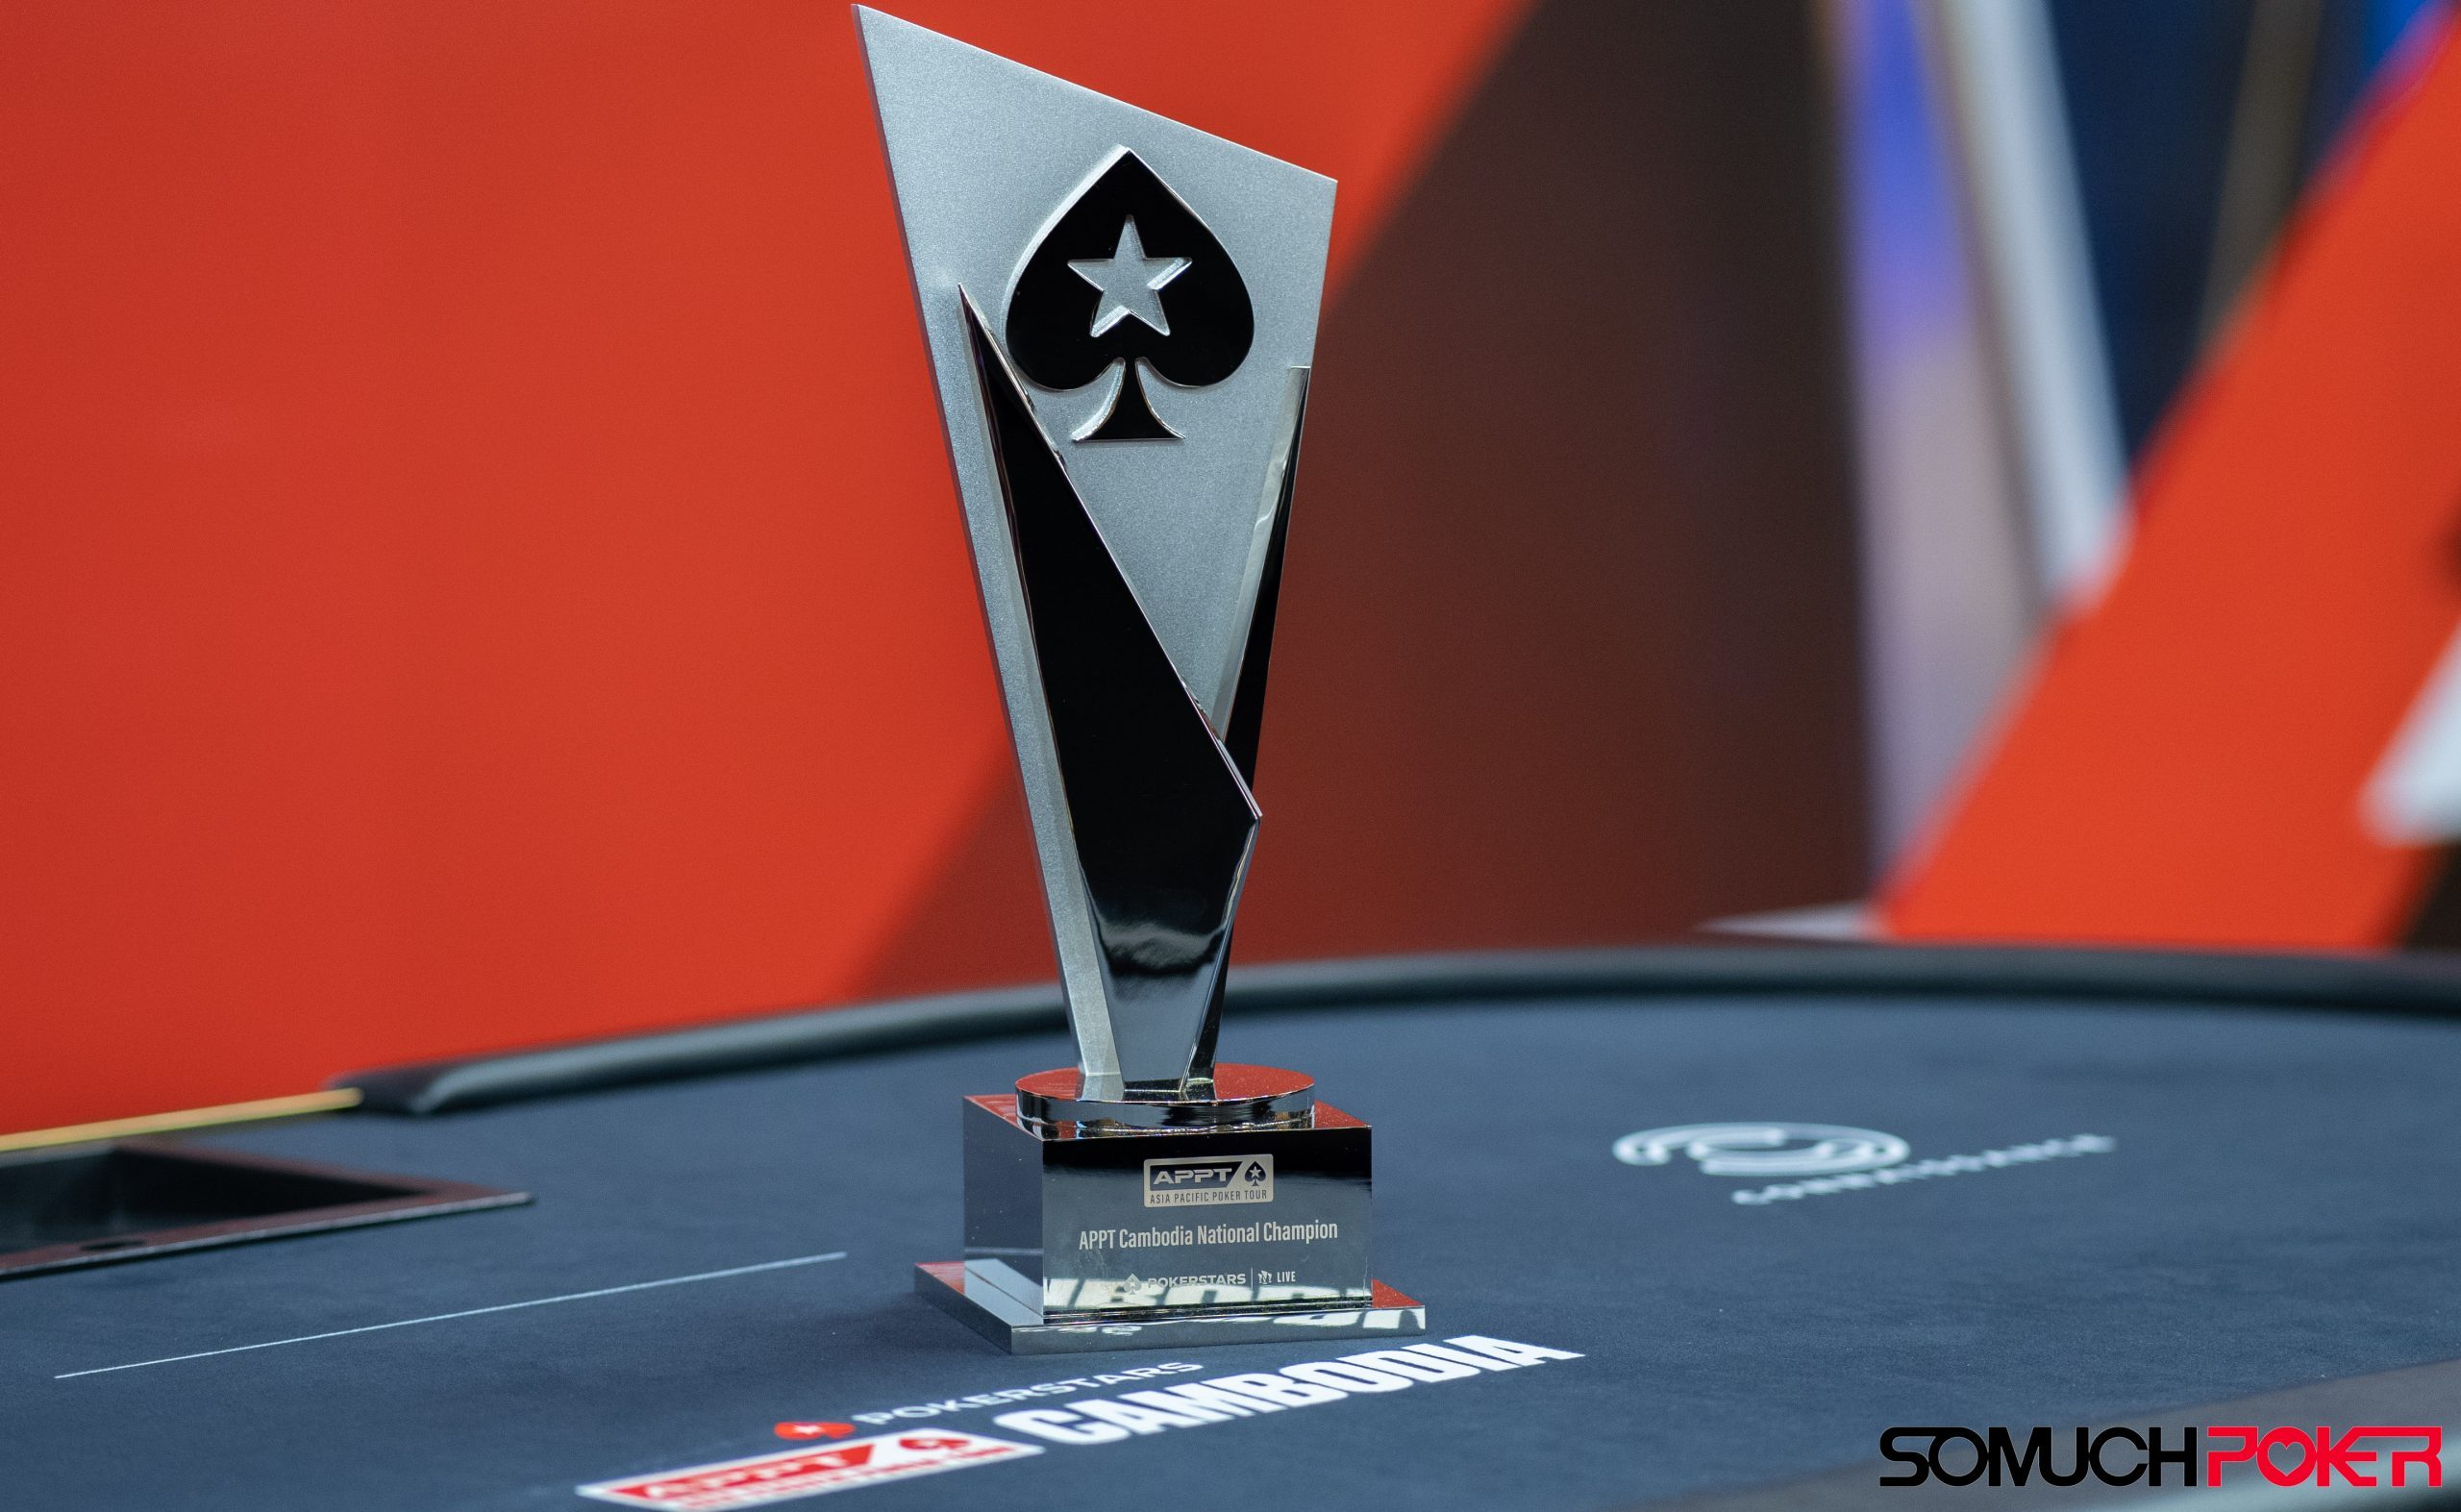 APPT Cambodia: First Shard Trophy up for grabs as APPT National $100K guaranteed gets underway